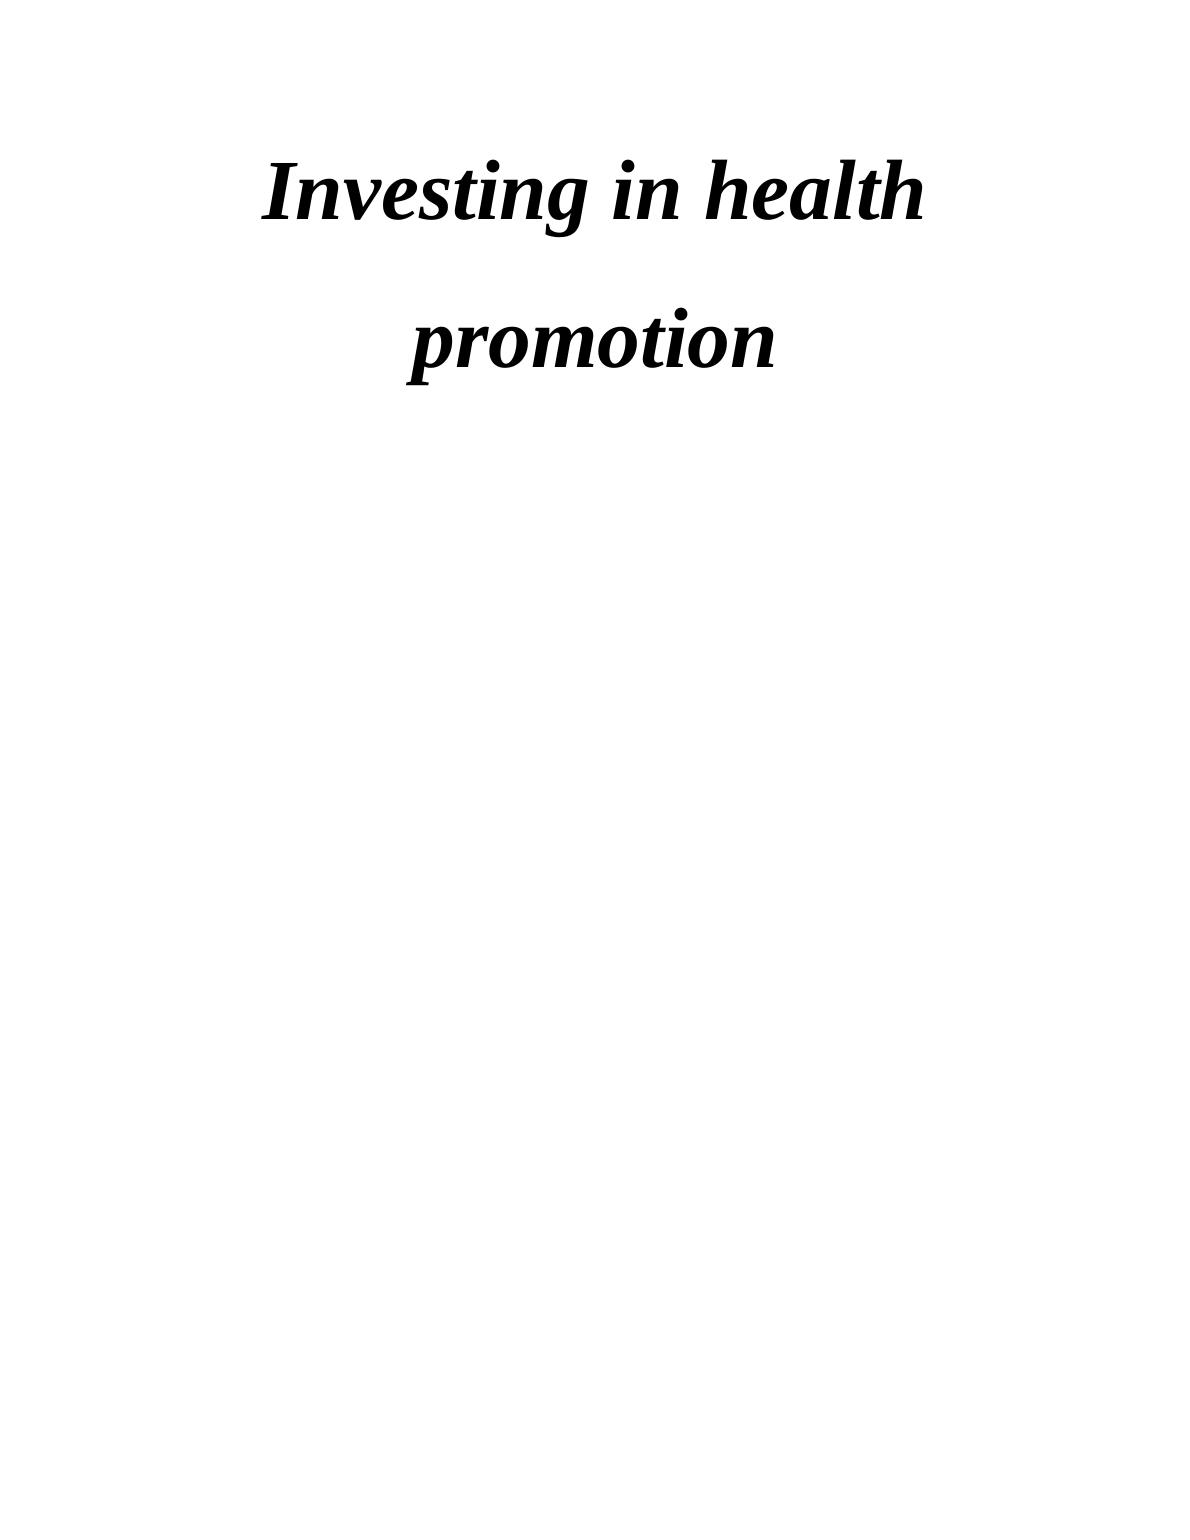 Investing in Health Promotion_1